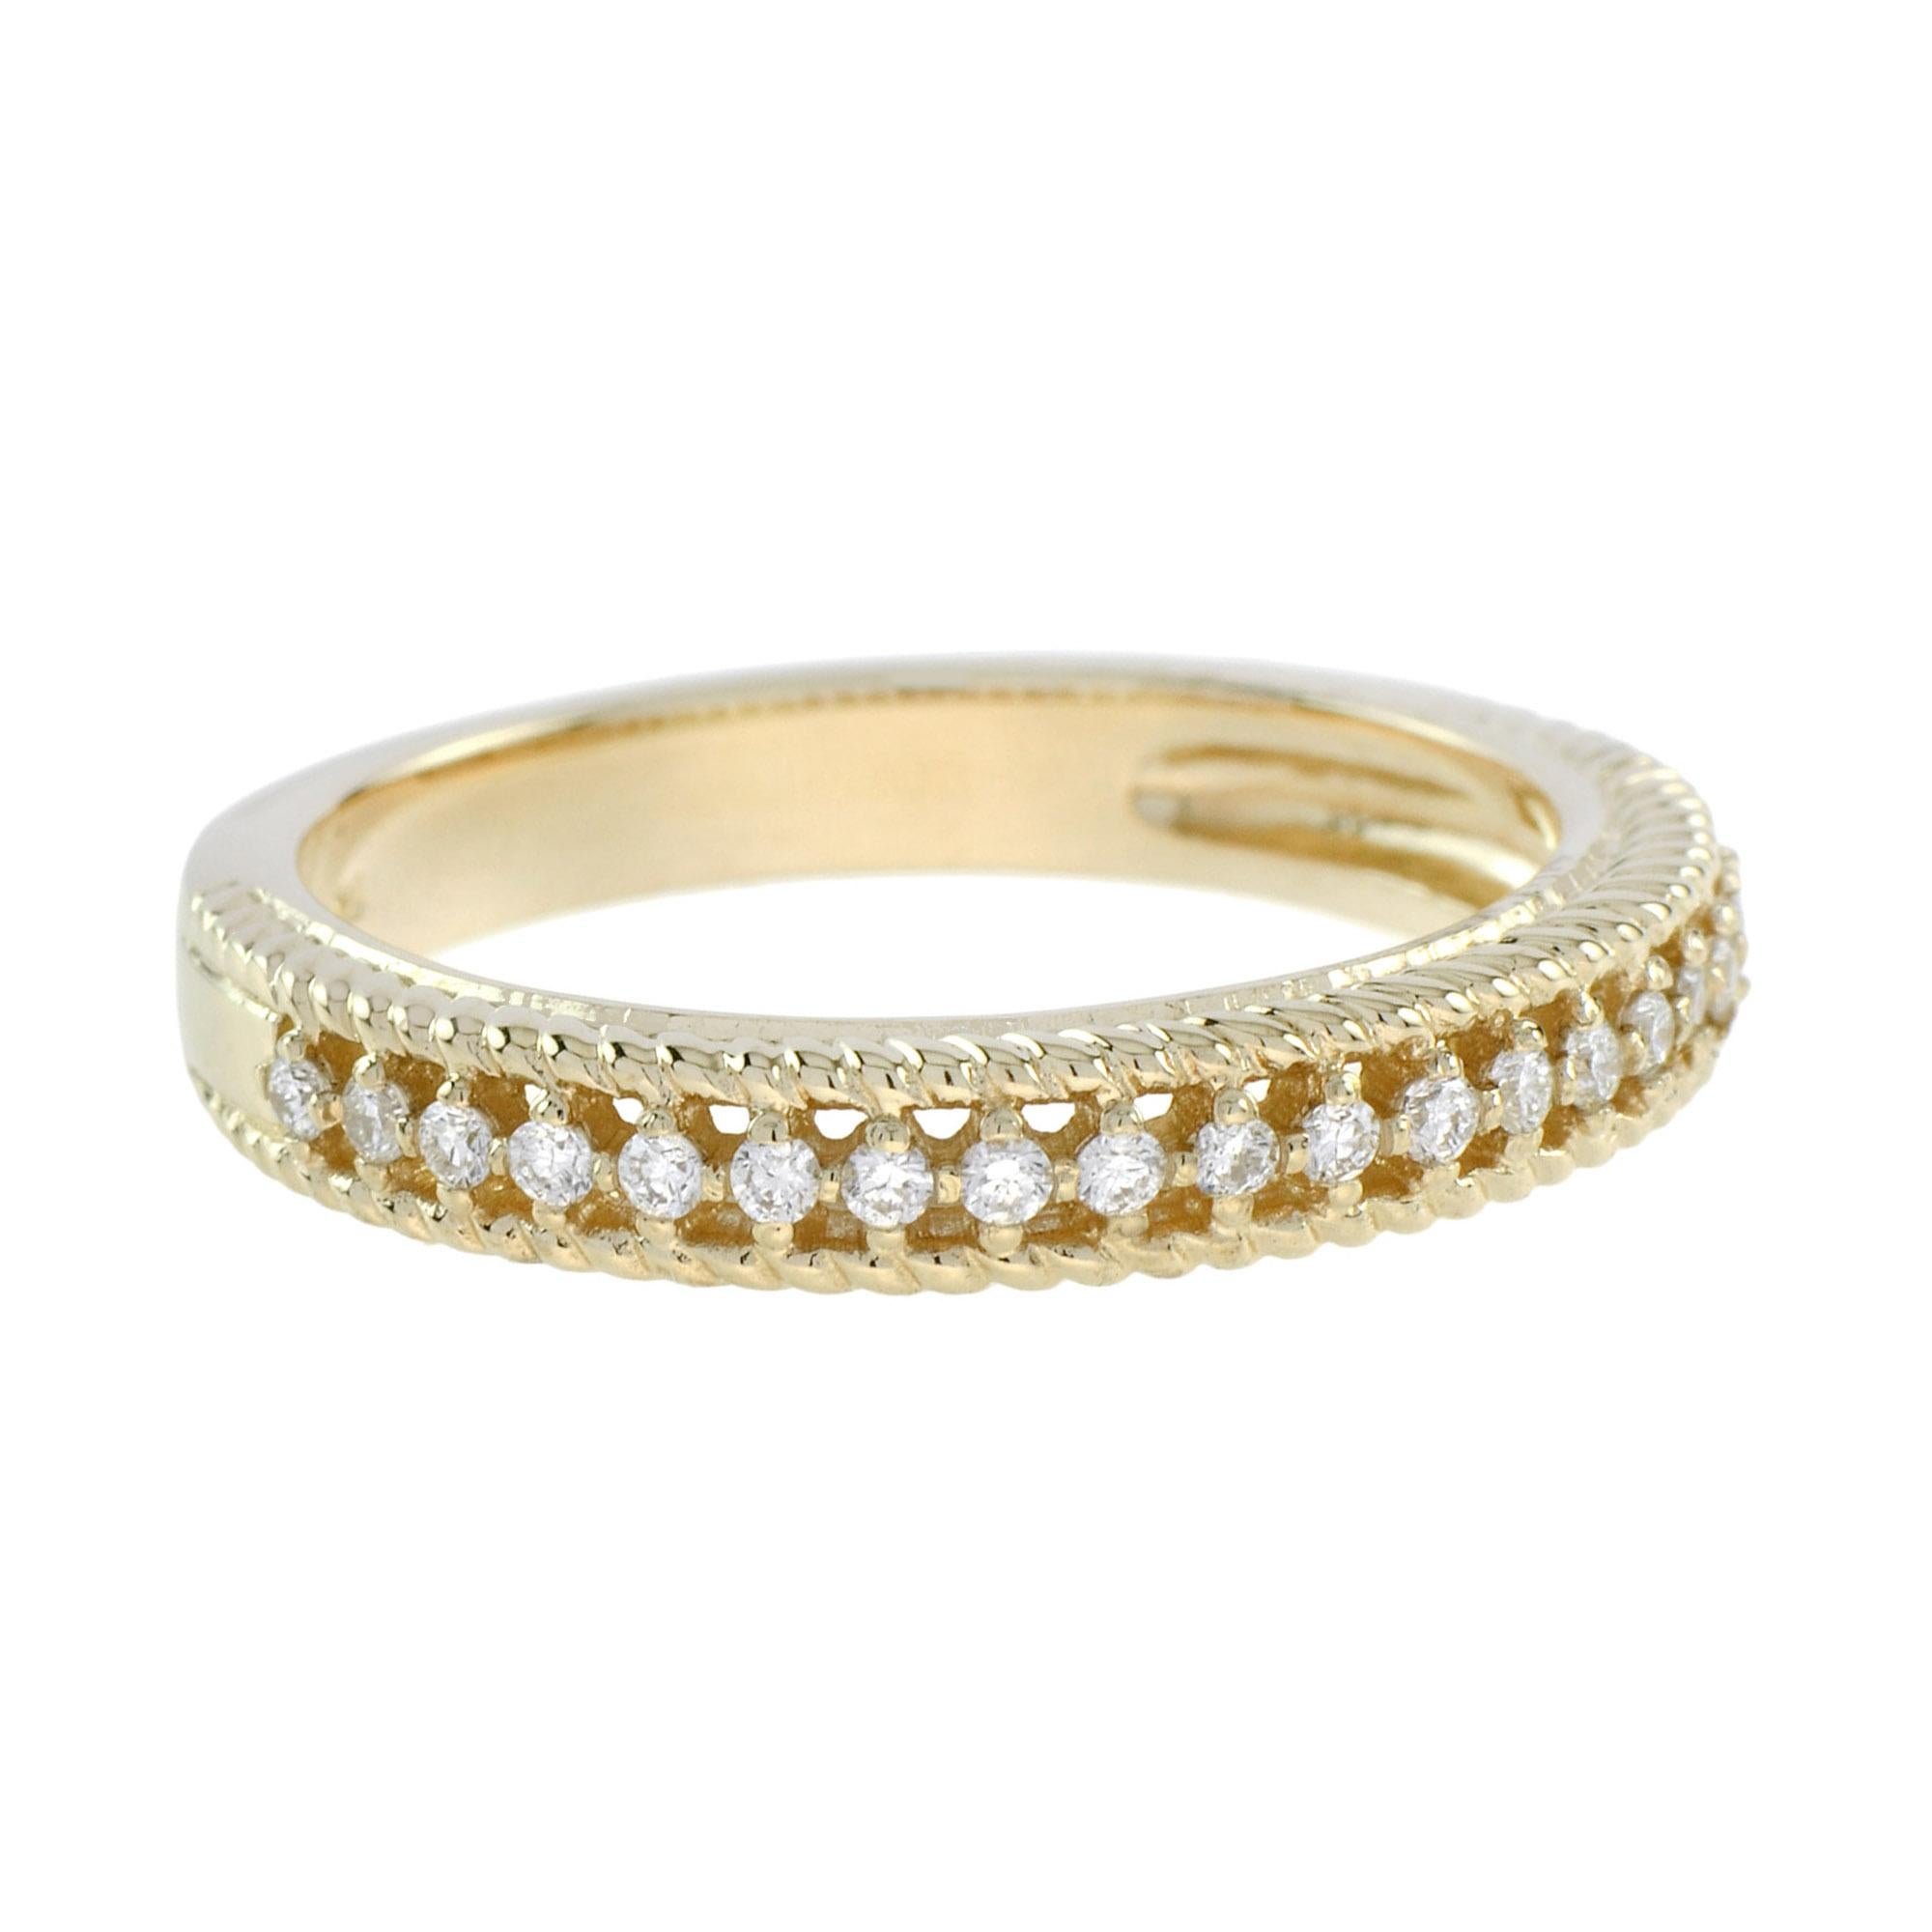 For Sale:  Vintage Style Diamond Half Eternity Wedding Band Ring in 14K Yellow Gold 2